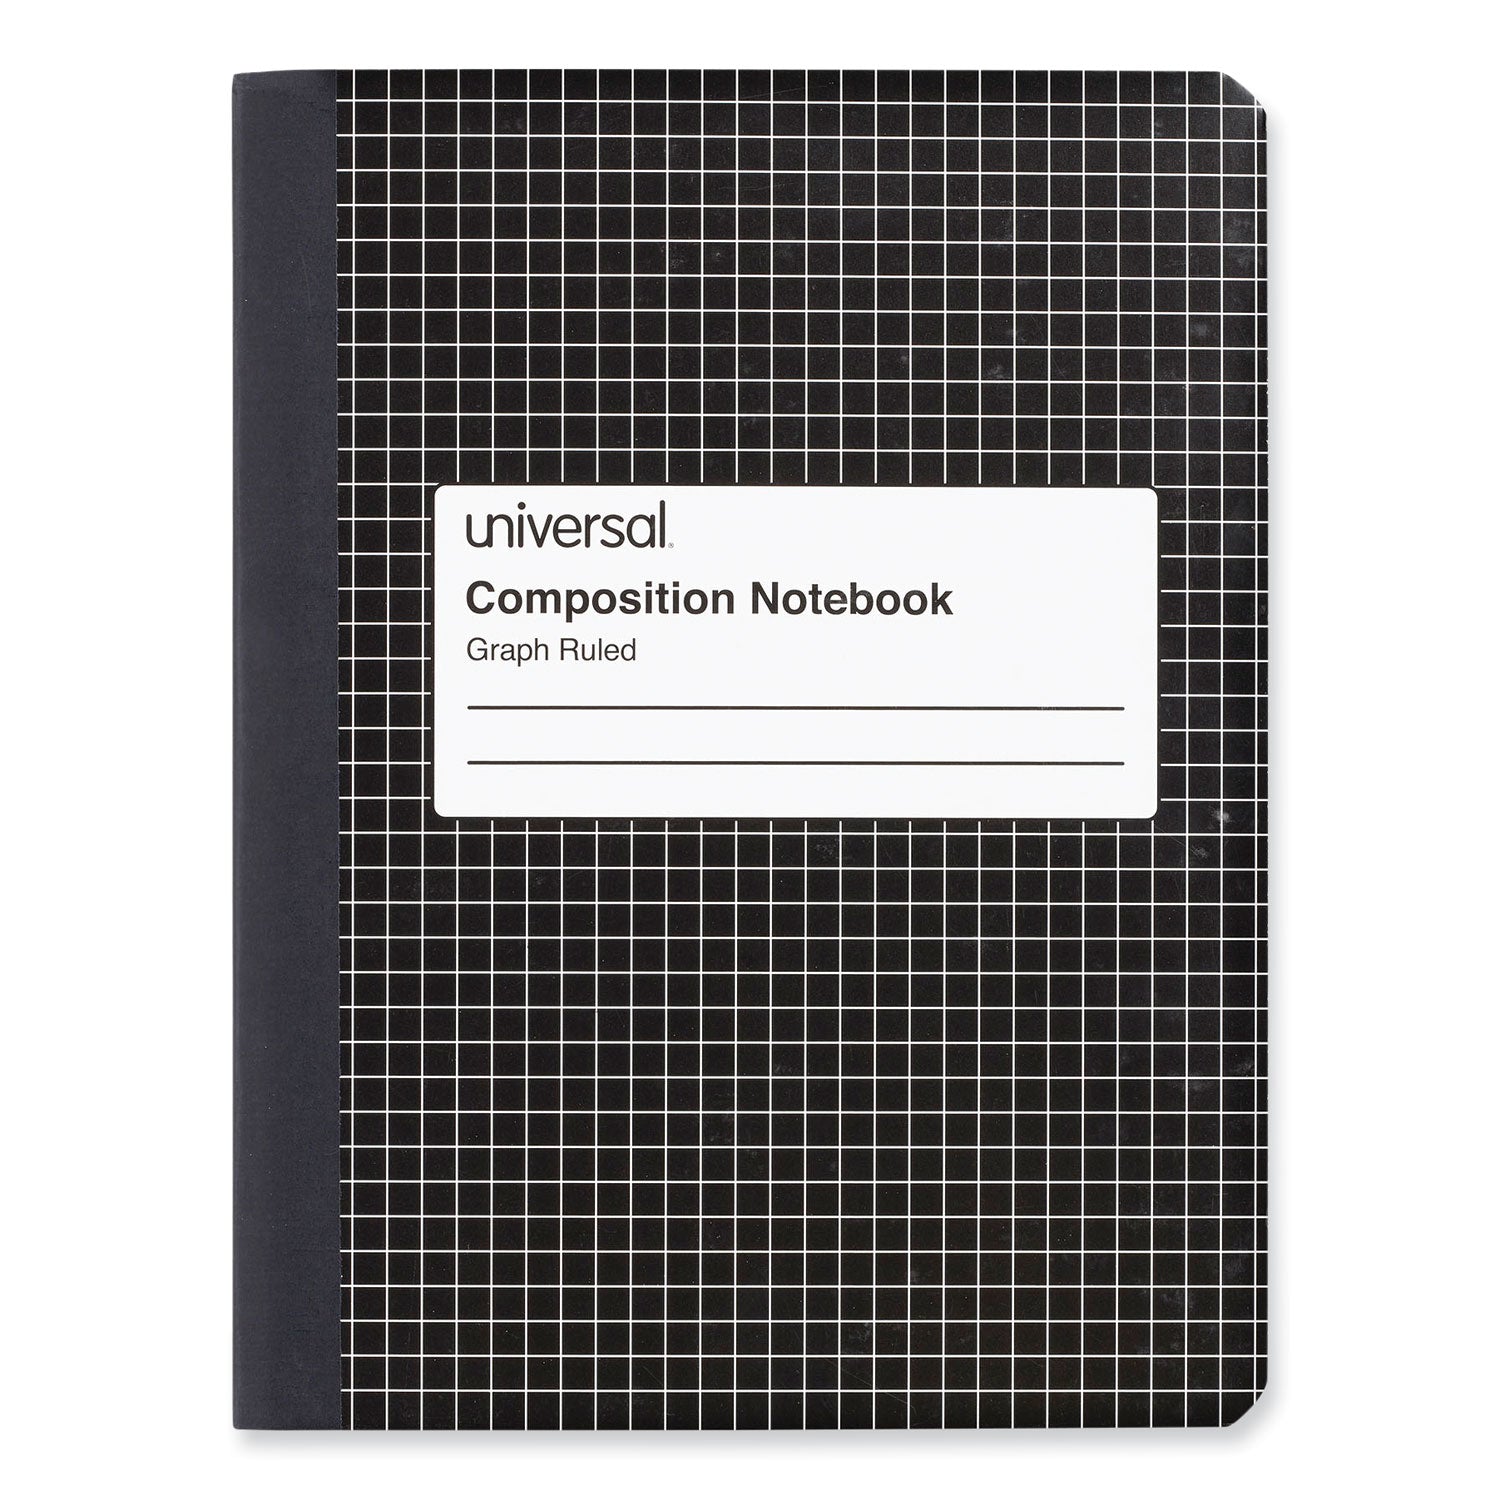 quad-rule-composition-book-quadrille-rule-4-sq-in-black-marble-cover-100-975-x-75-sheets-6-pack_unv20957 - 2